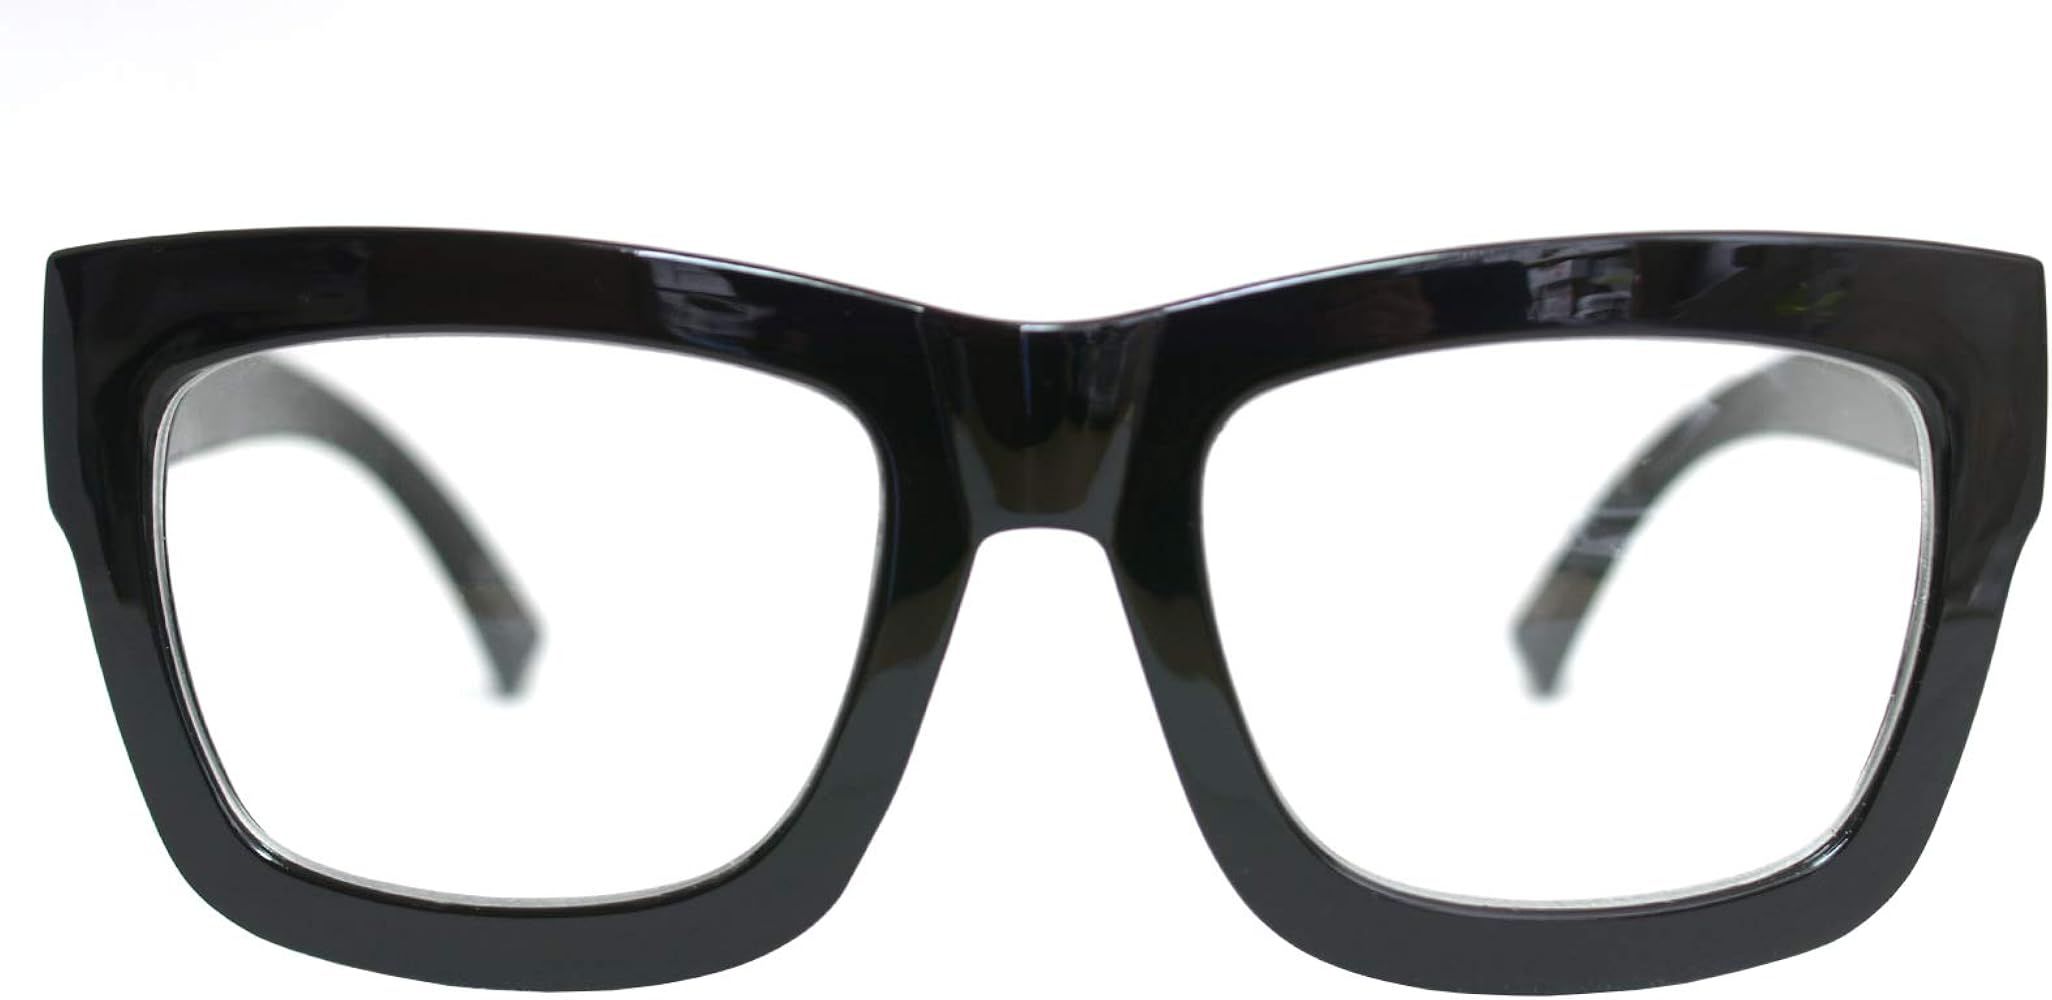 Vintage Inspired Geek Oversized Square Thick Horn Rimmed Eyeglasses Clear Lens | Amazon (US)